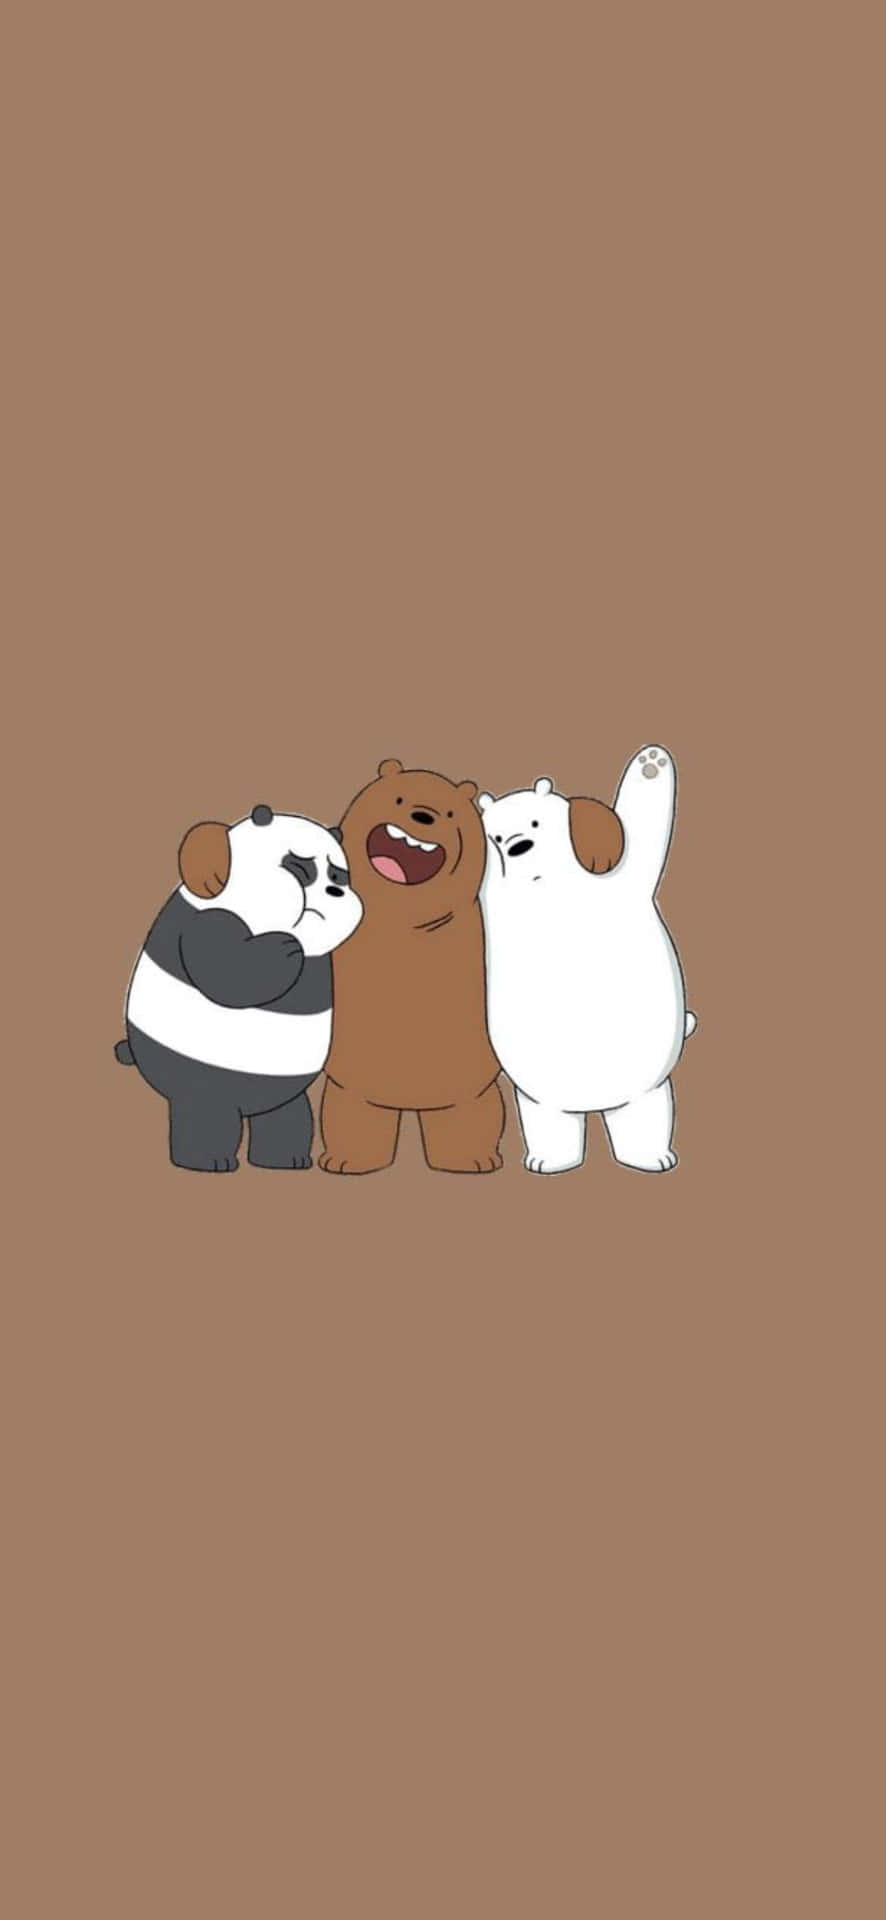 Three Cartoon Bears Are Standing Together On A Brown Background Wallpaper